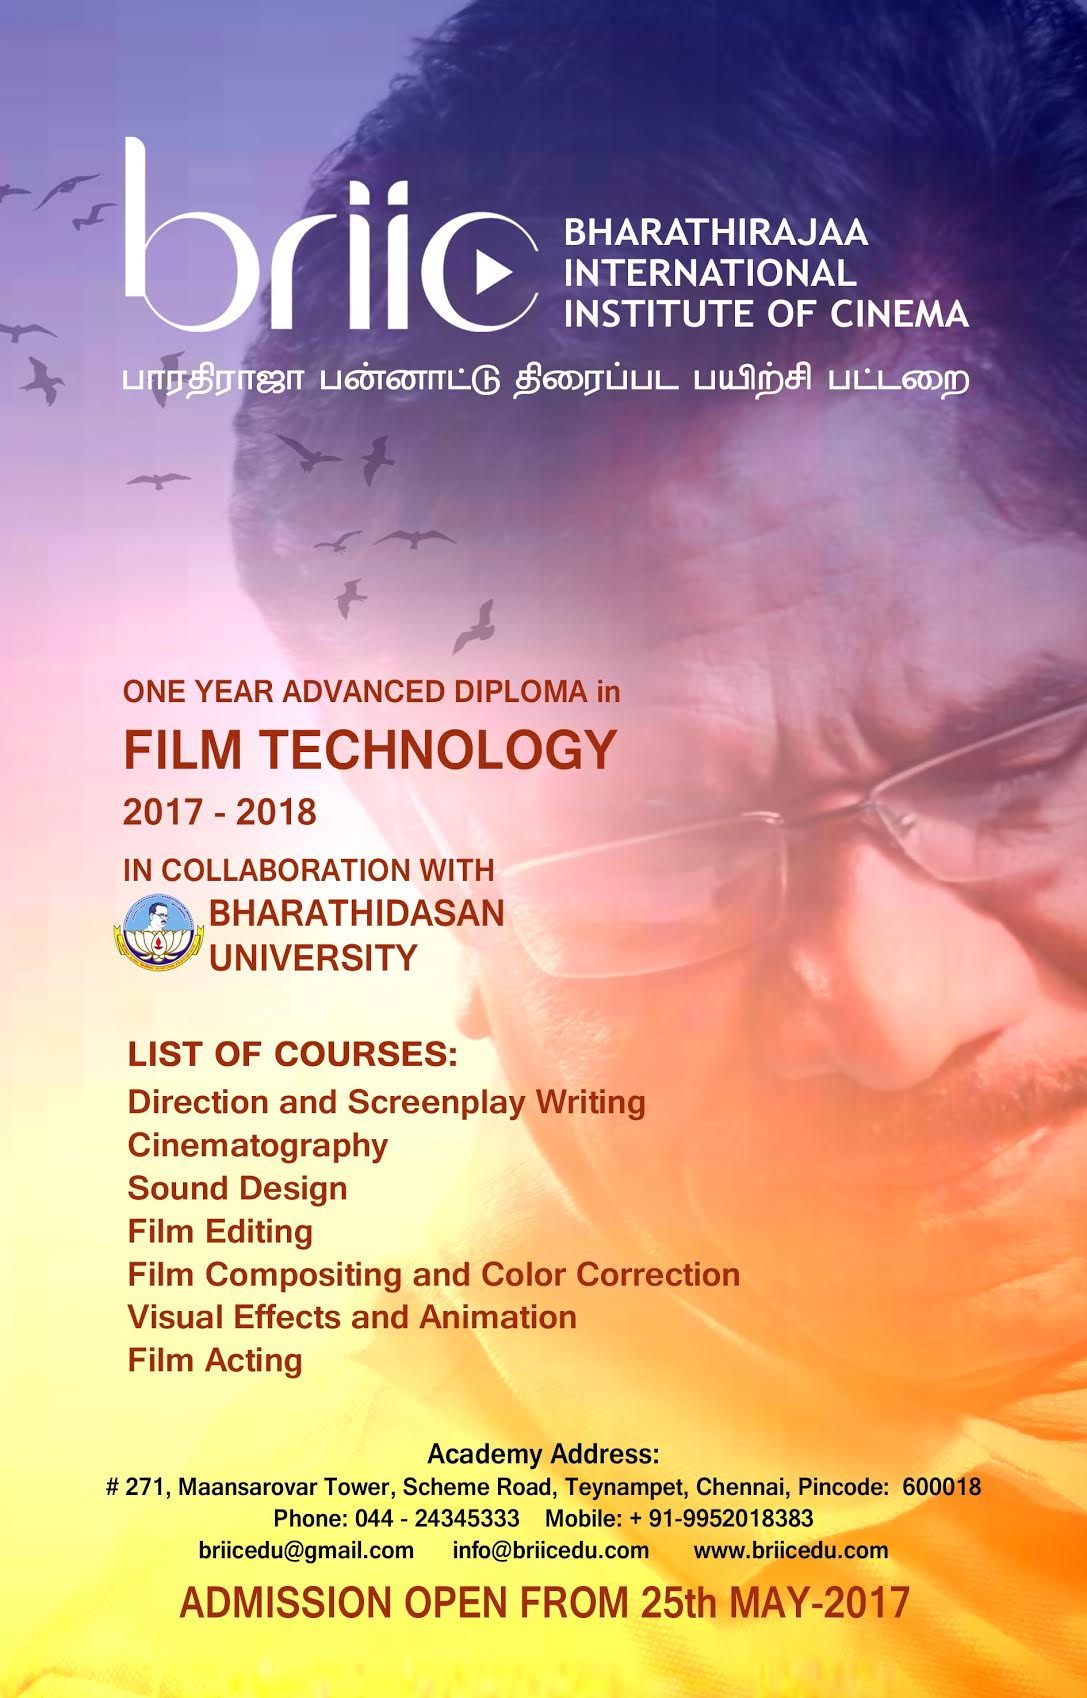 BRIIC-Admission-Open-From-May-25th-Poster